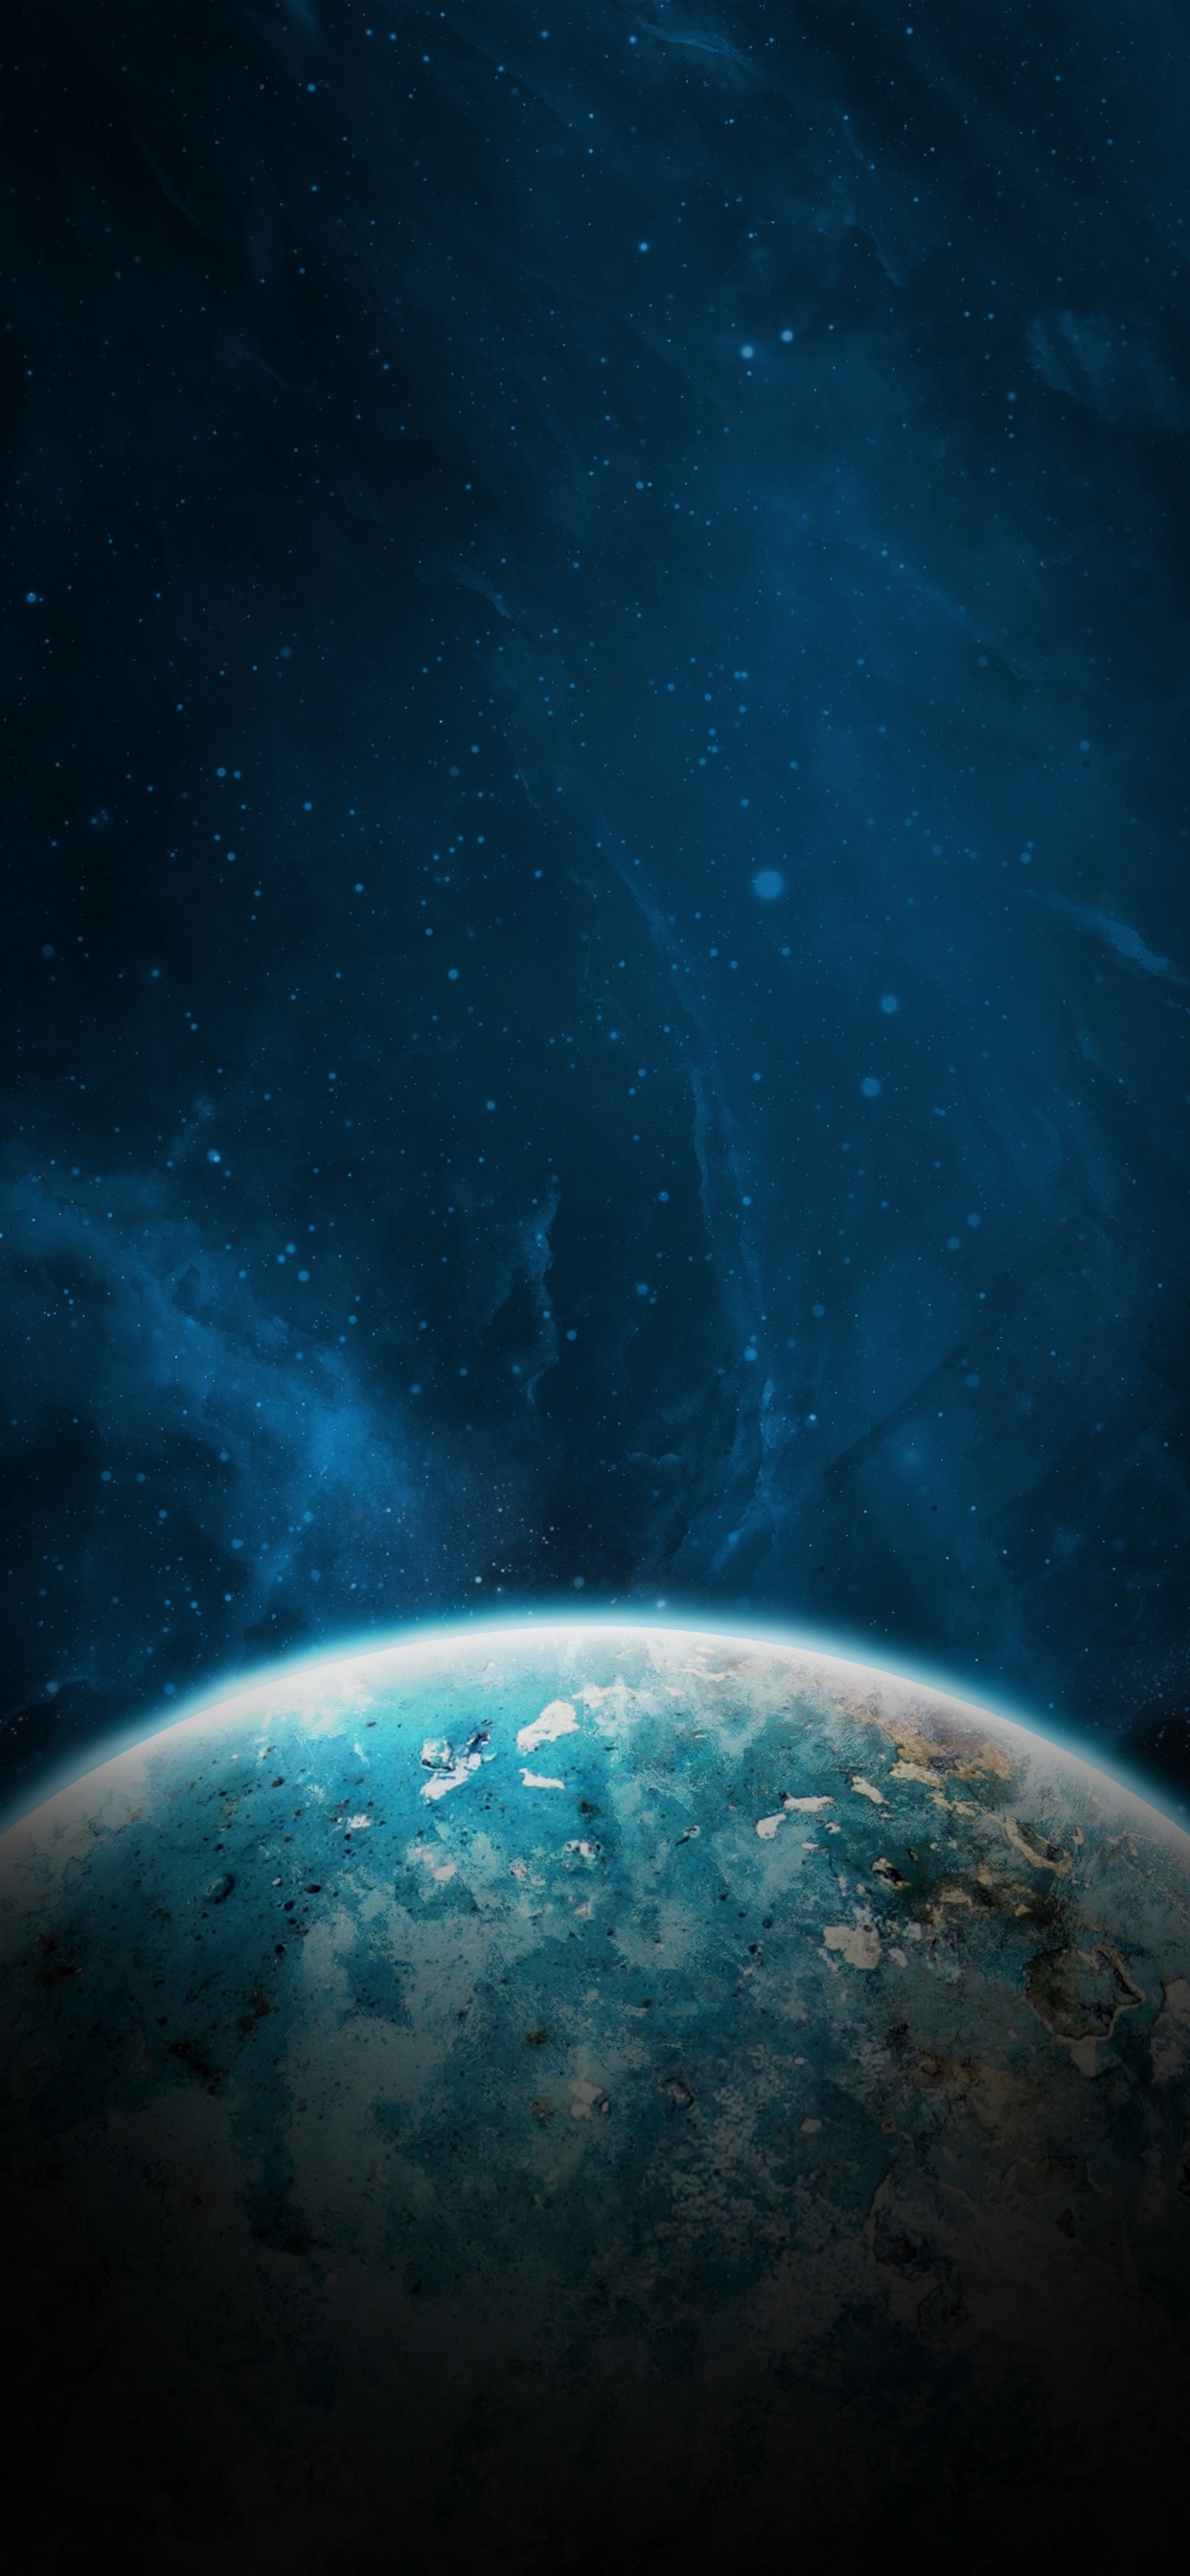 Blue and Black Planet With Stars. Wallpaper in 1242x2688 Resolution